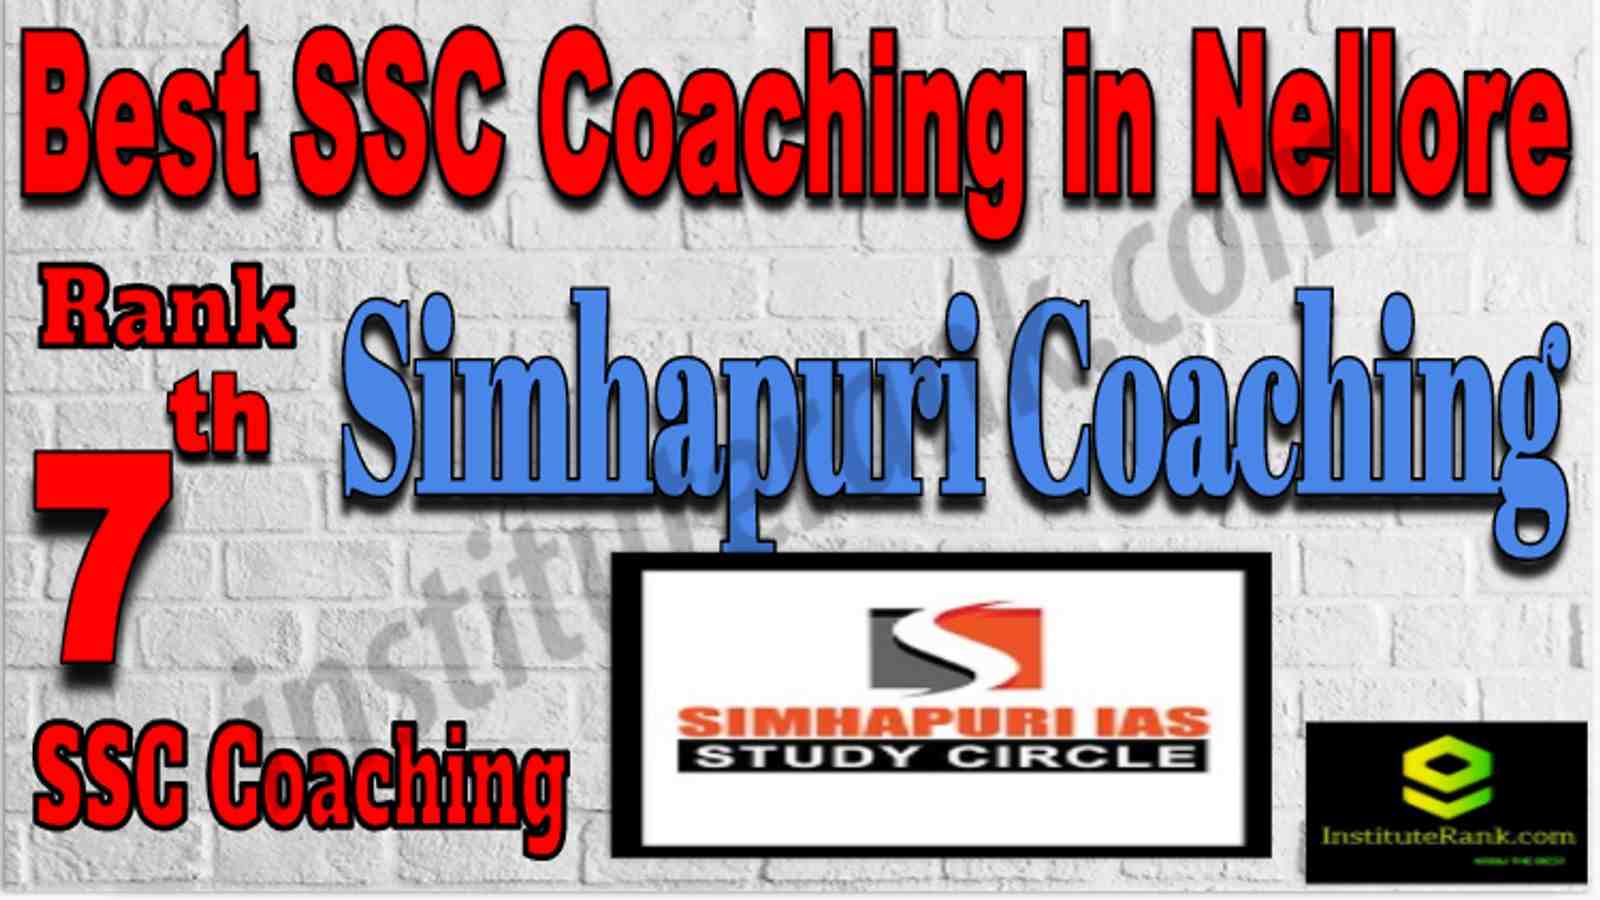 Rank 7 Best SSC Coaching in Nellore